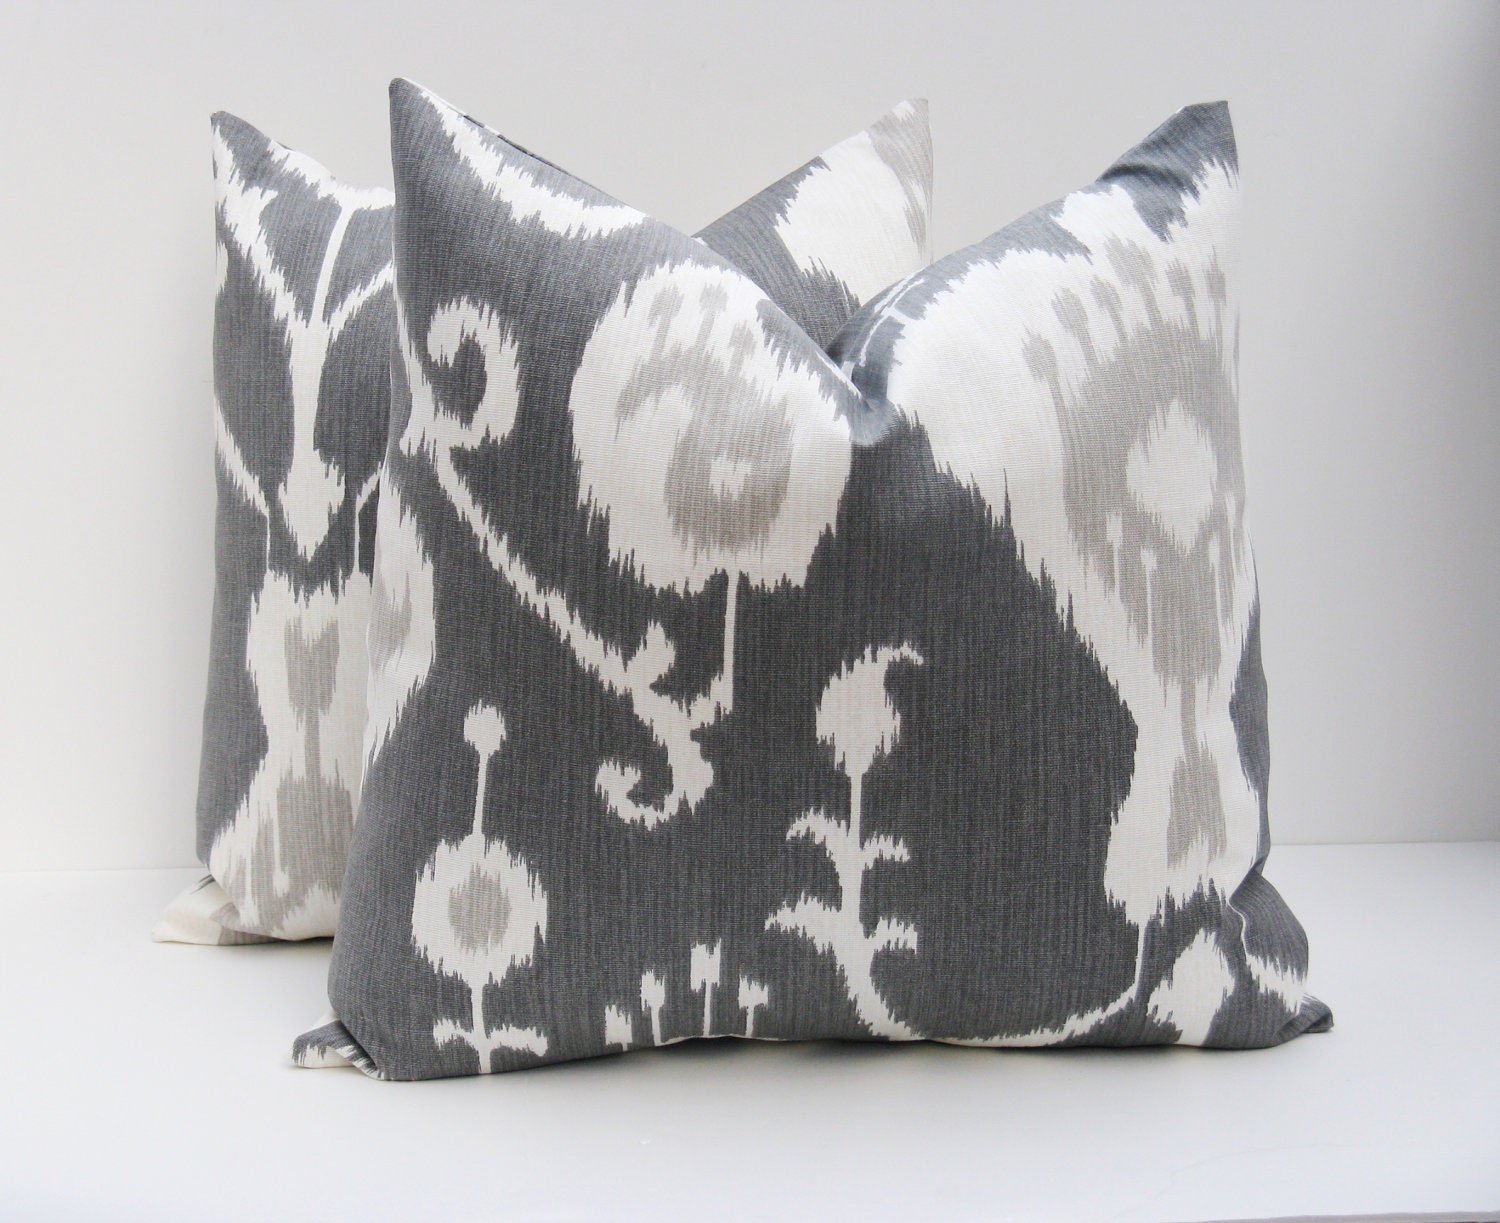 20x20 Throw Pillow Covers.Ikat Pillow.Dark Gray Pillow.Grey Ikat pillow. Gray and White.Housewares.Home Decor Printed fabric on both sides